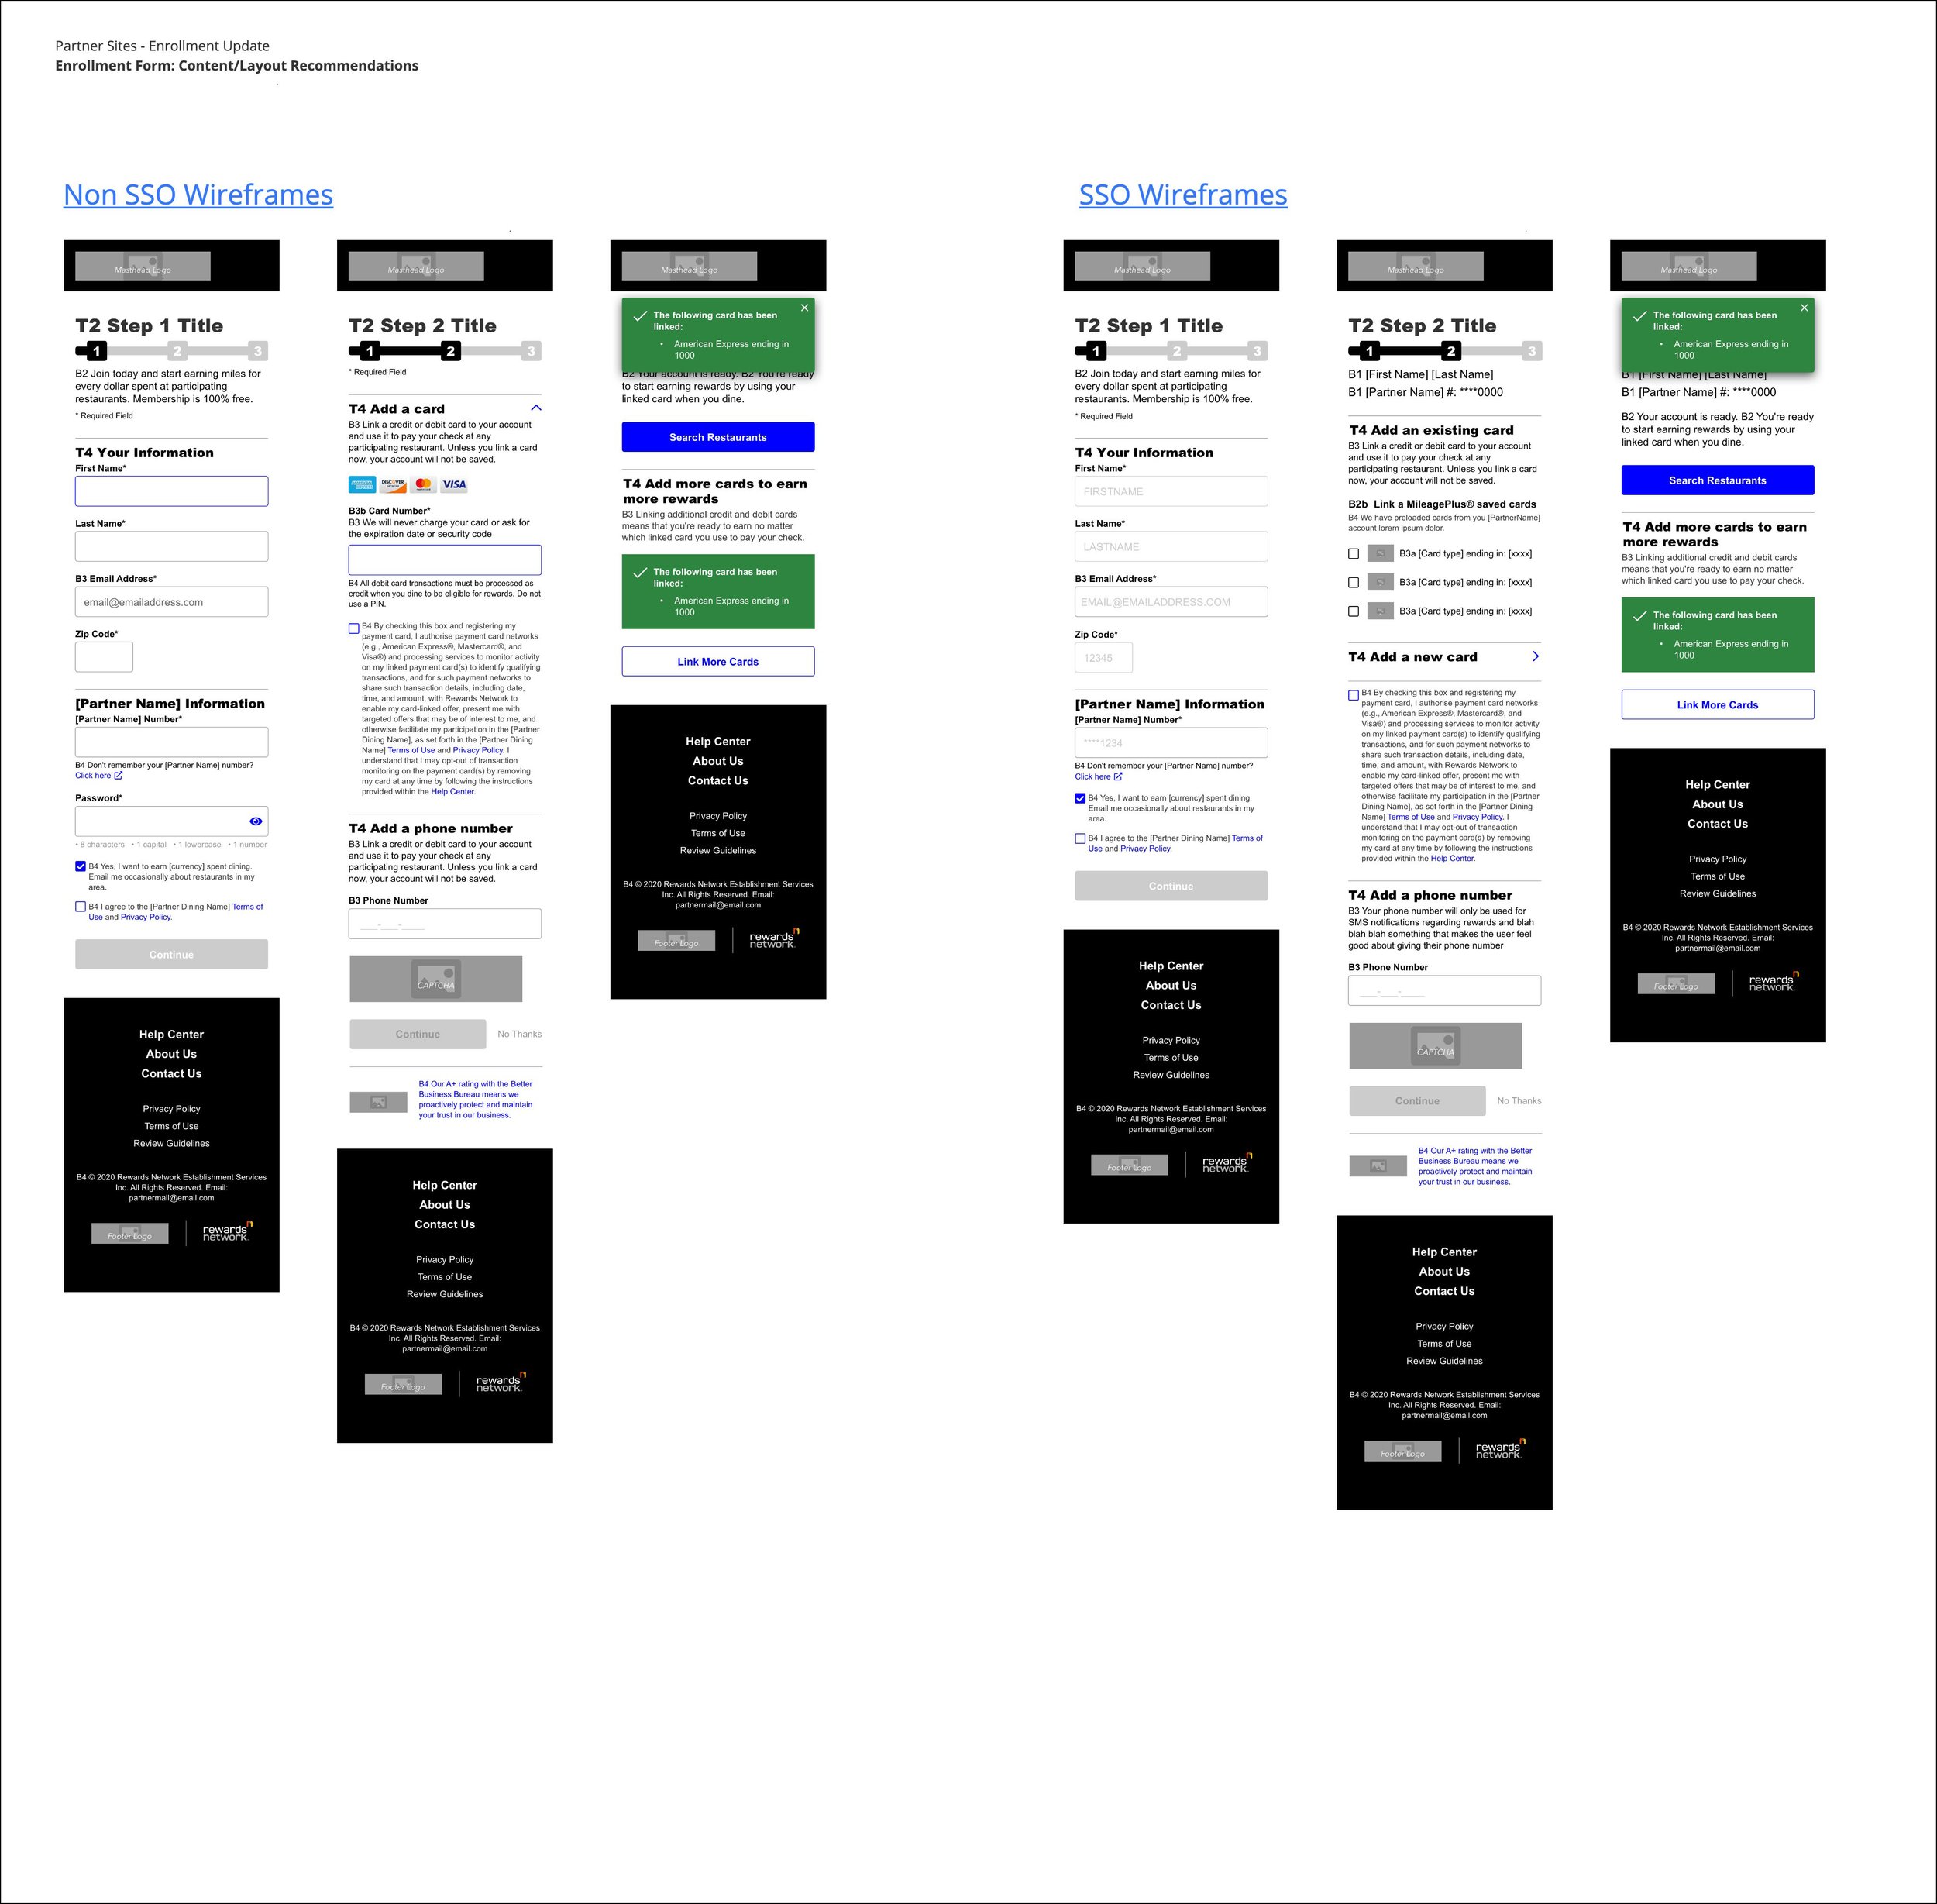 RN PS_ Enrollment - 2022 - Form - Recommendations - 04 WIREFRAMES.jpg